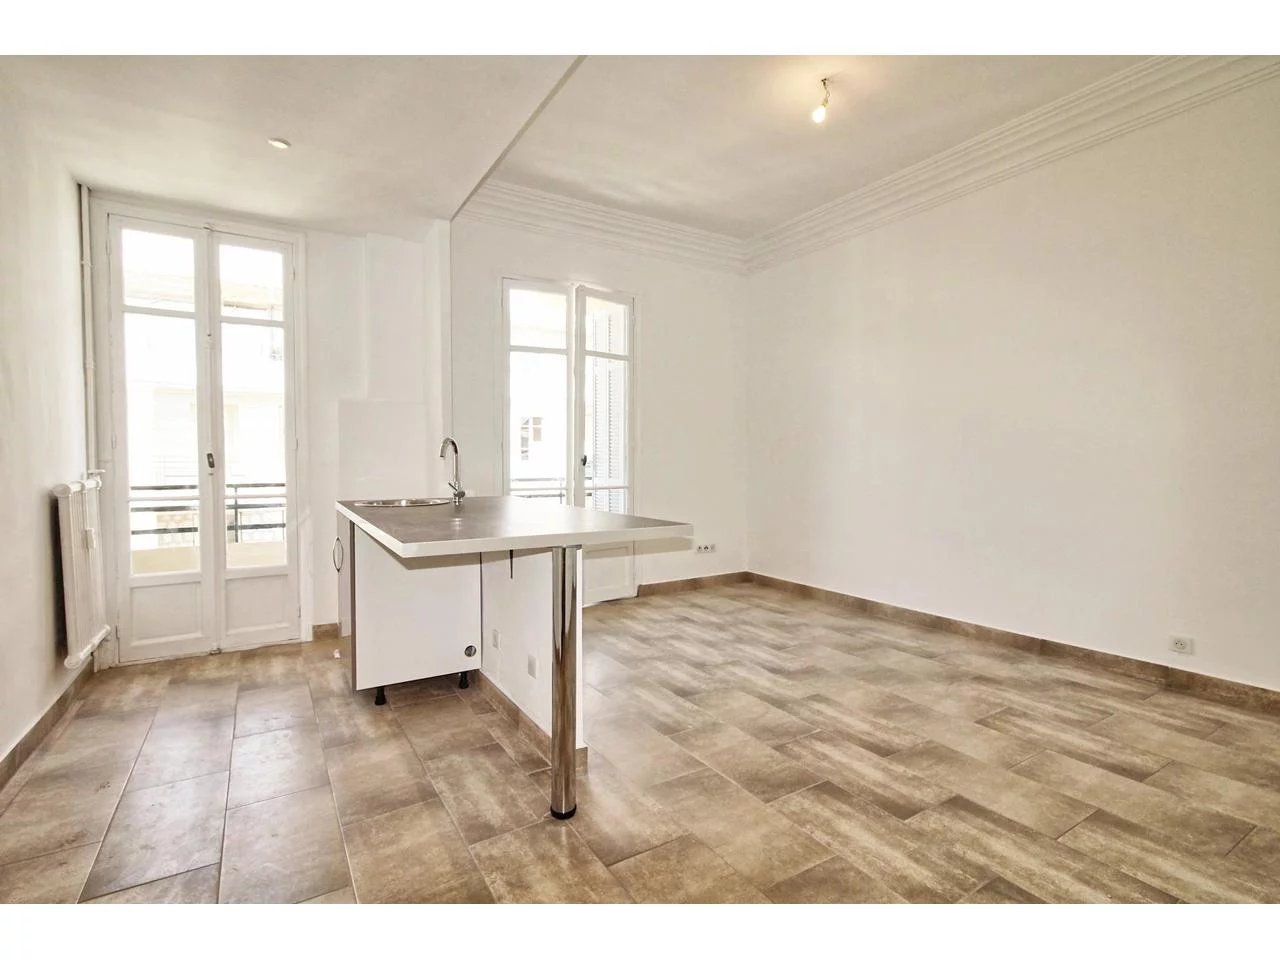 Appartement  1 Rooms 24.63m2  for sale   155 000 €